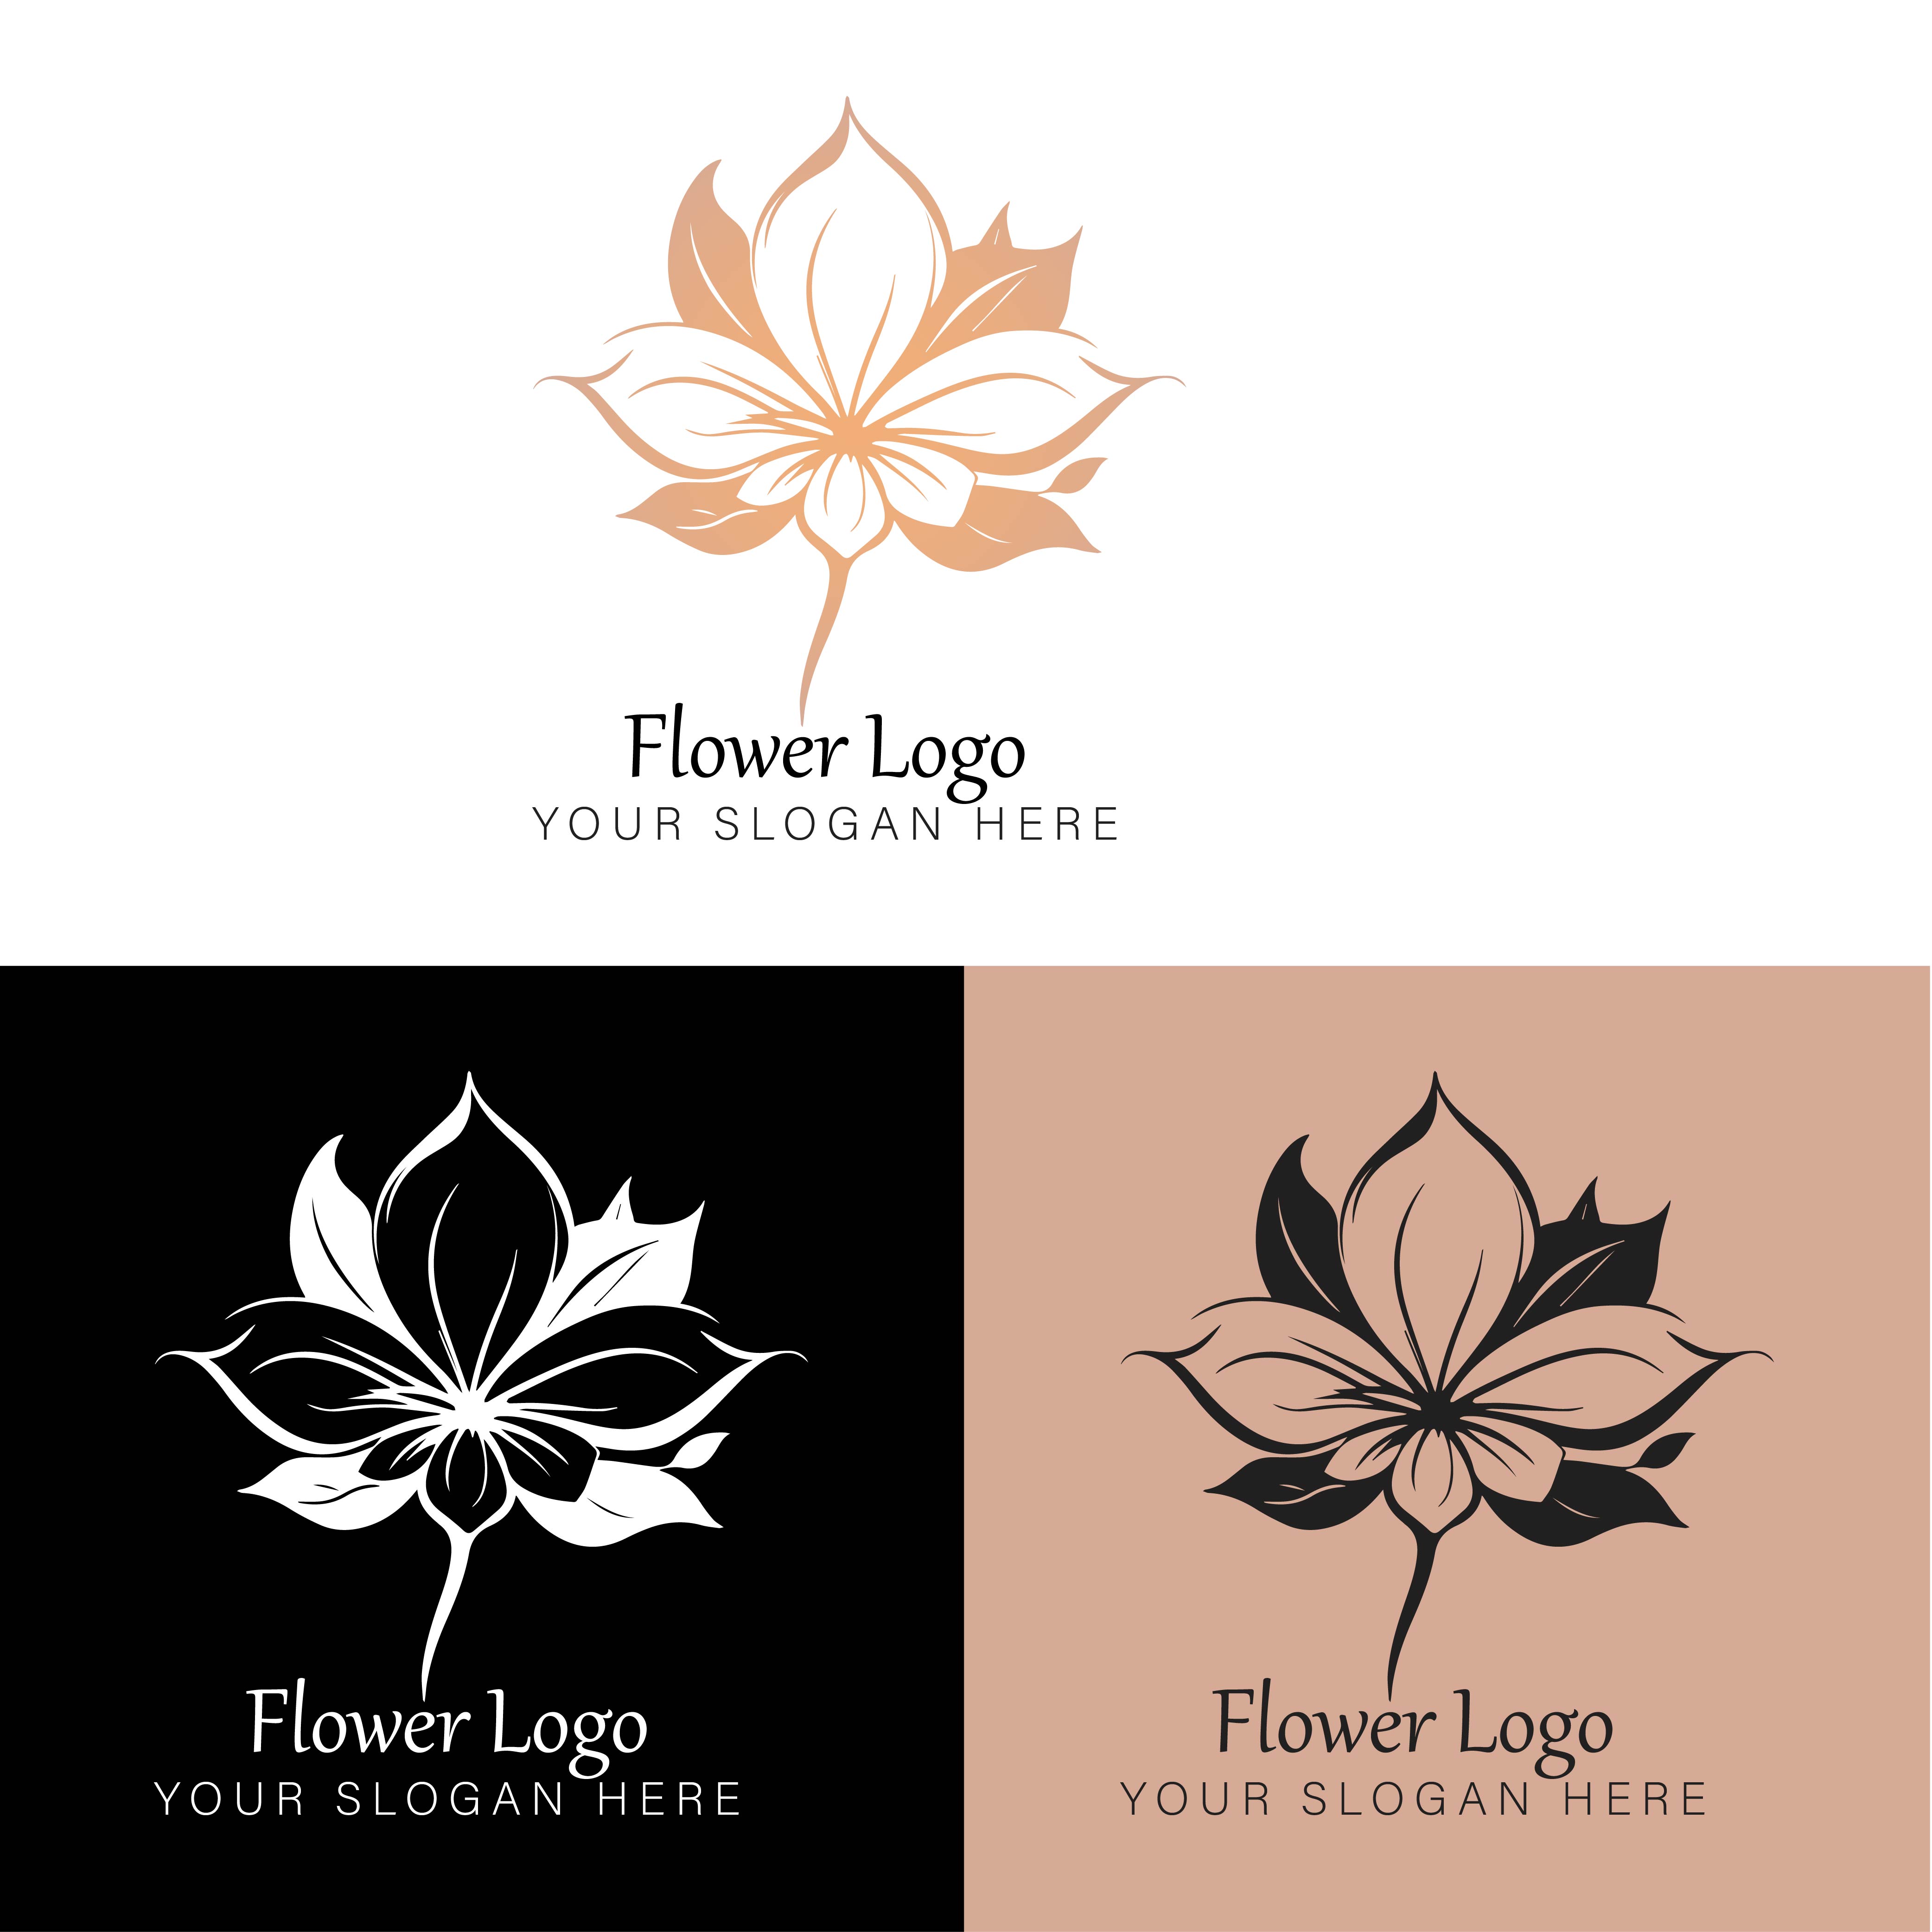 Flower Logo preview image.